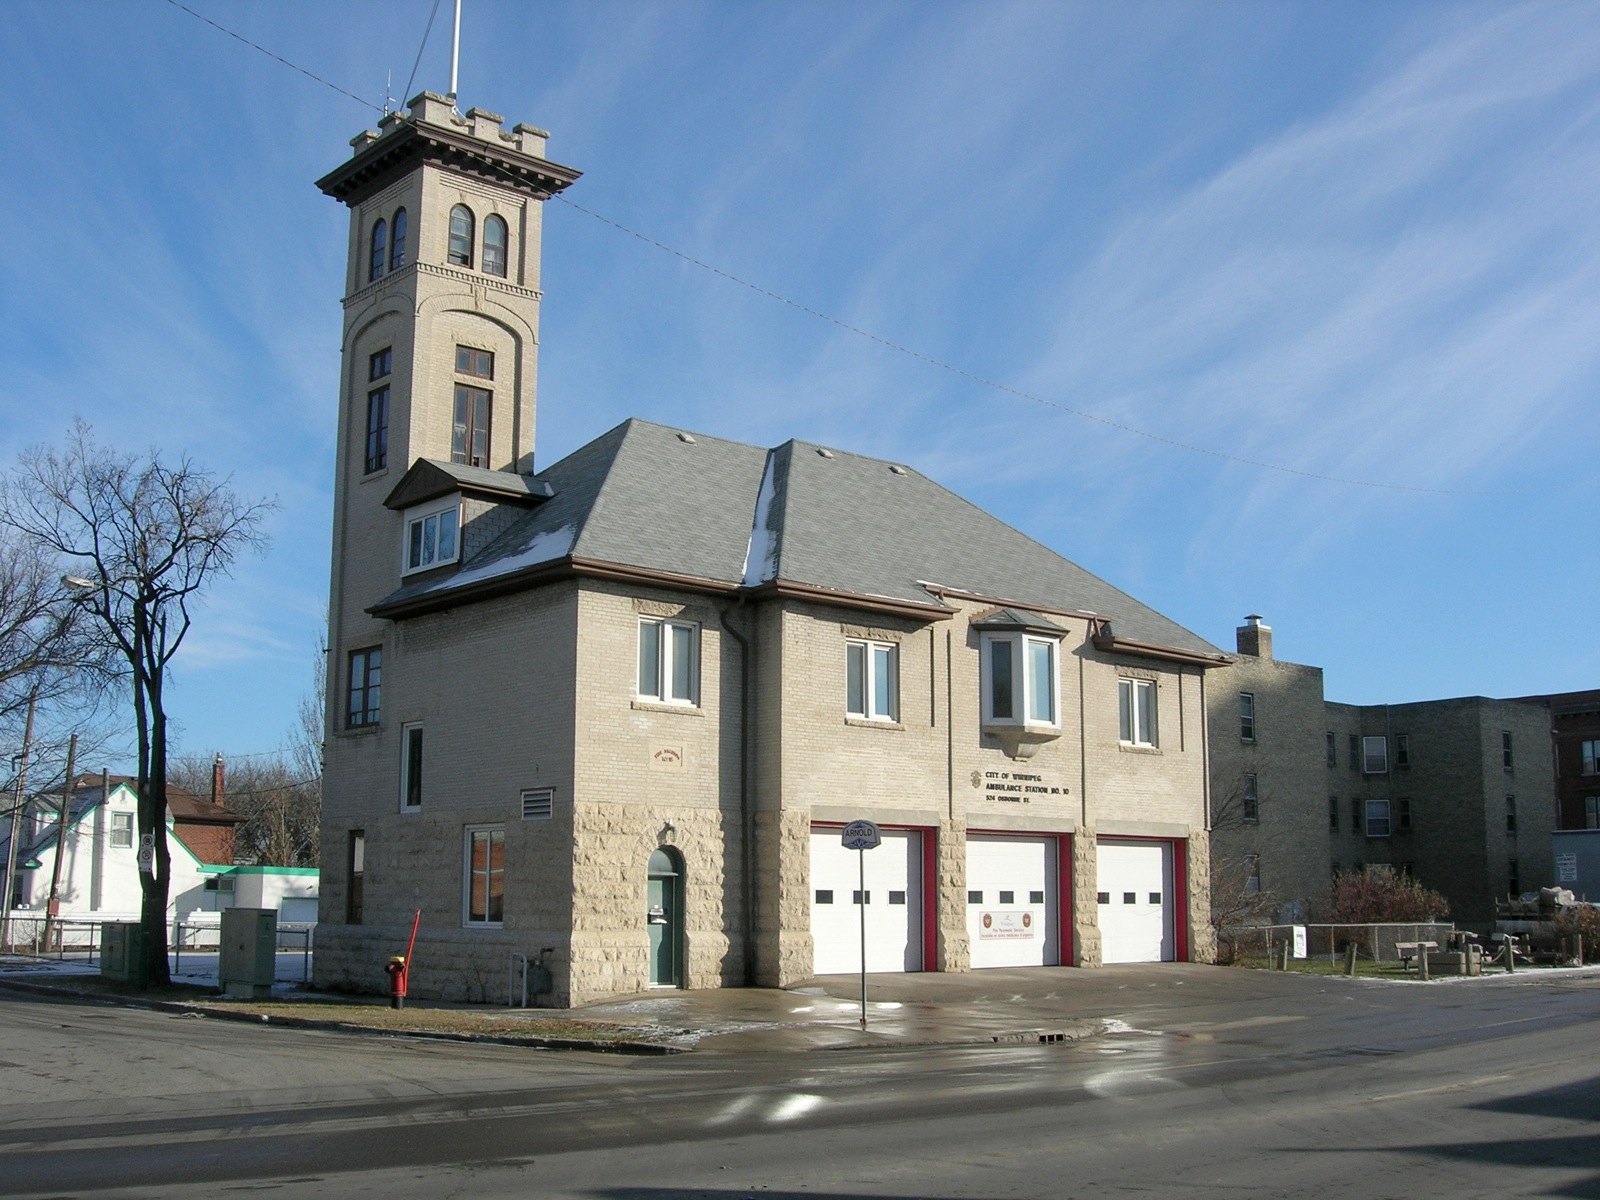 a large grey building with a clock tower near the street